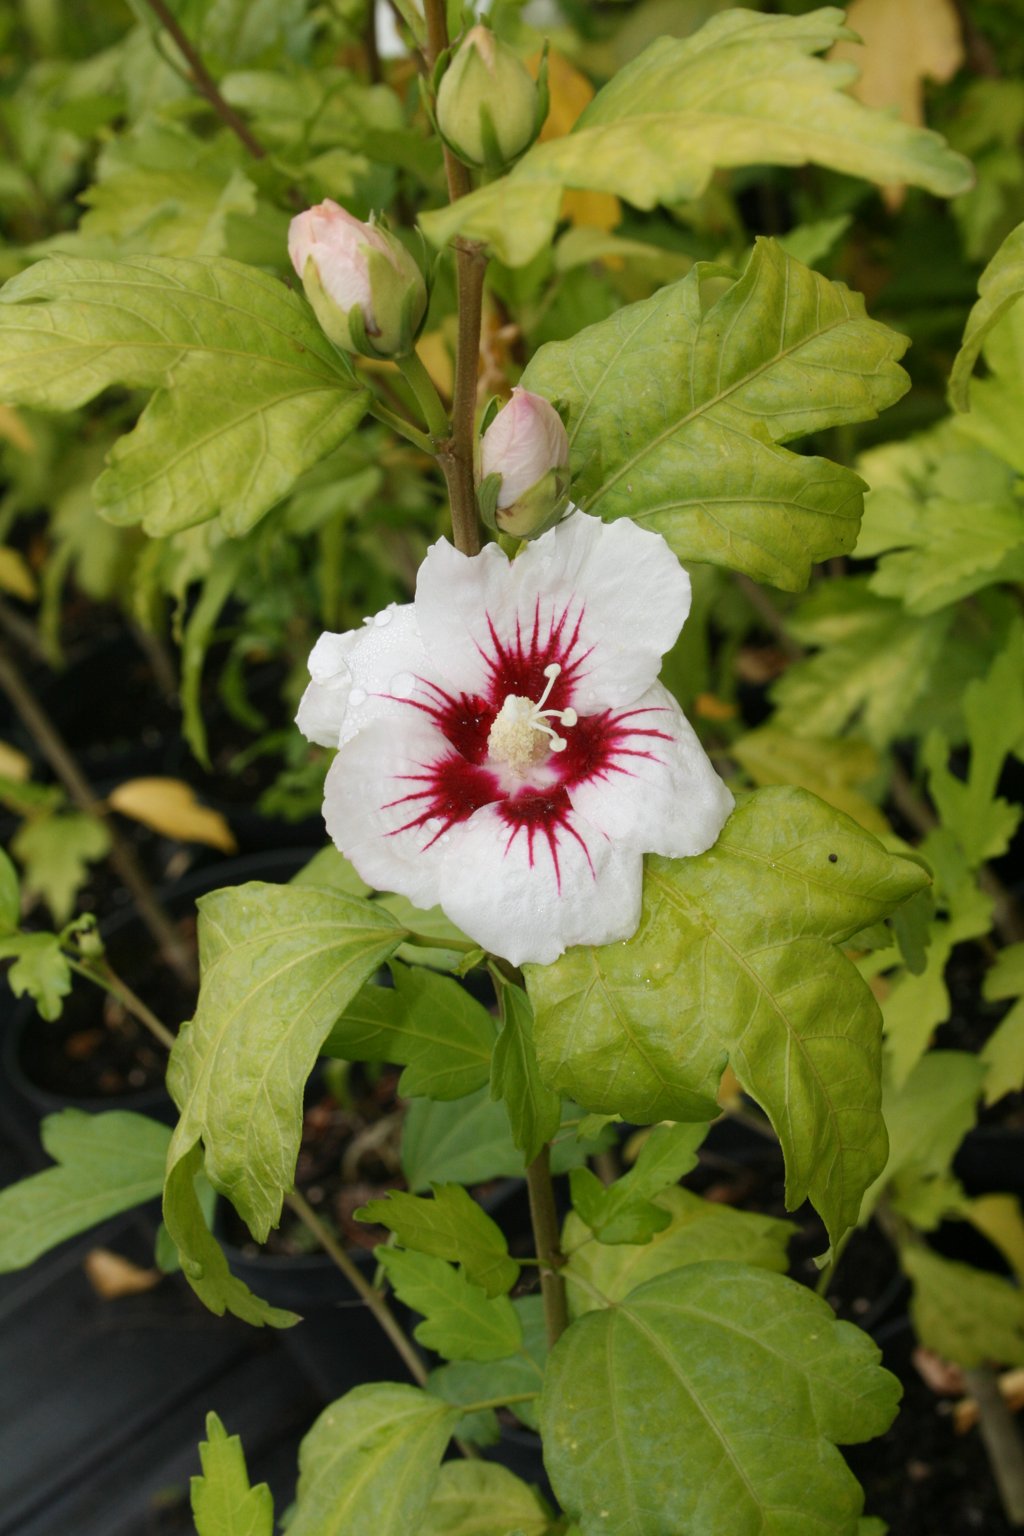 Ketmia syryjska "Red Heart" / Hibiscus syriacus "Red Heart"